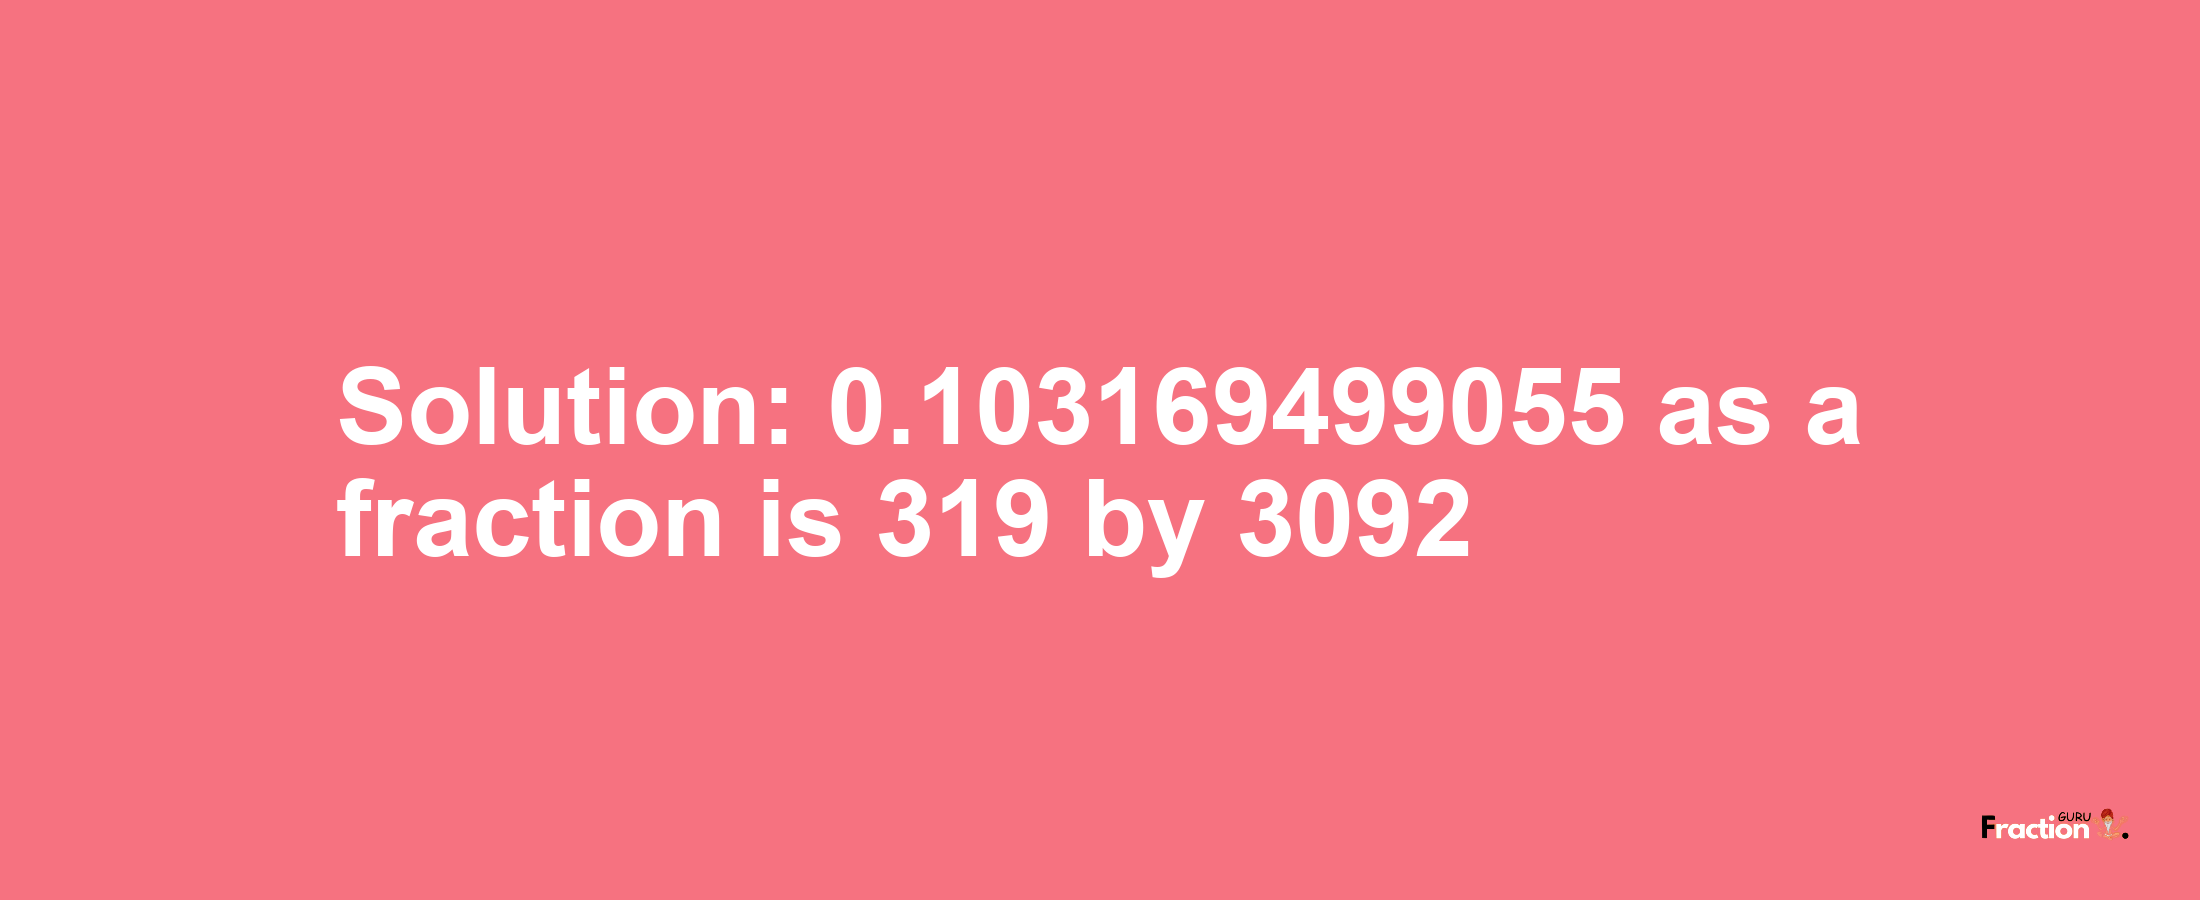 Solution:0.103169499055 as a fraction is 319/3092